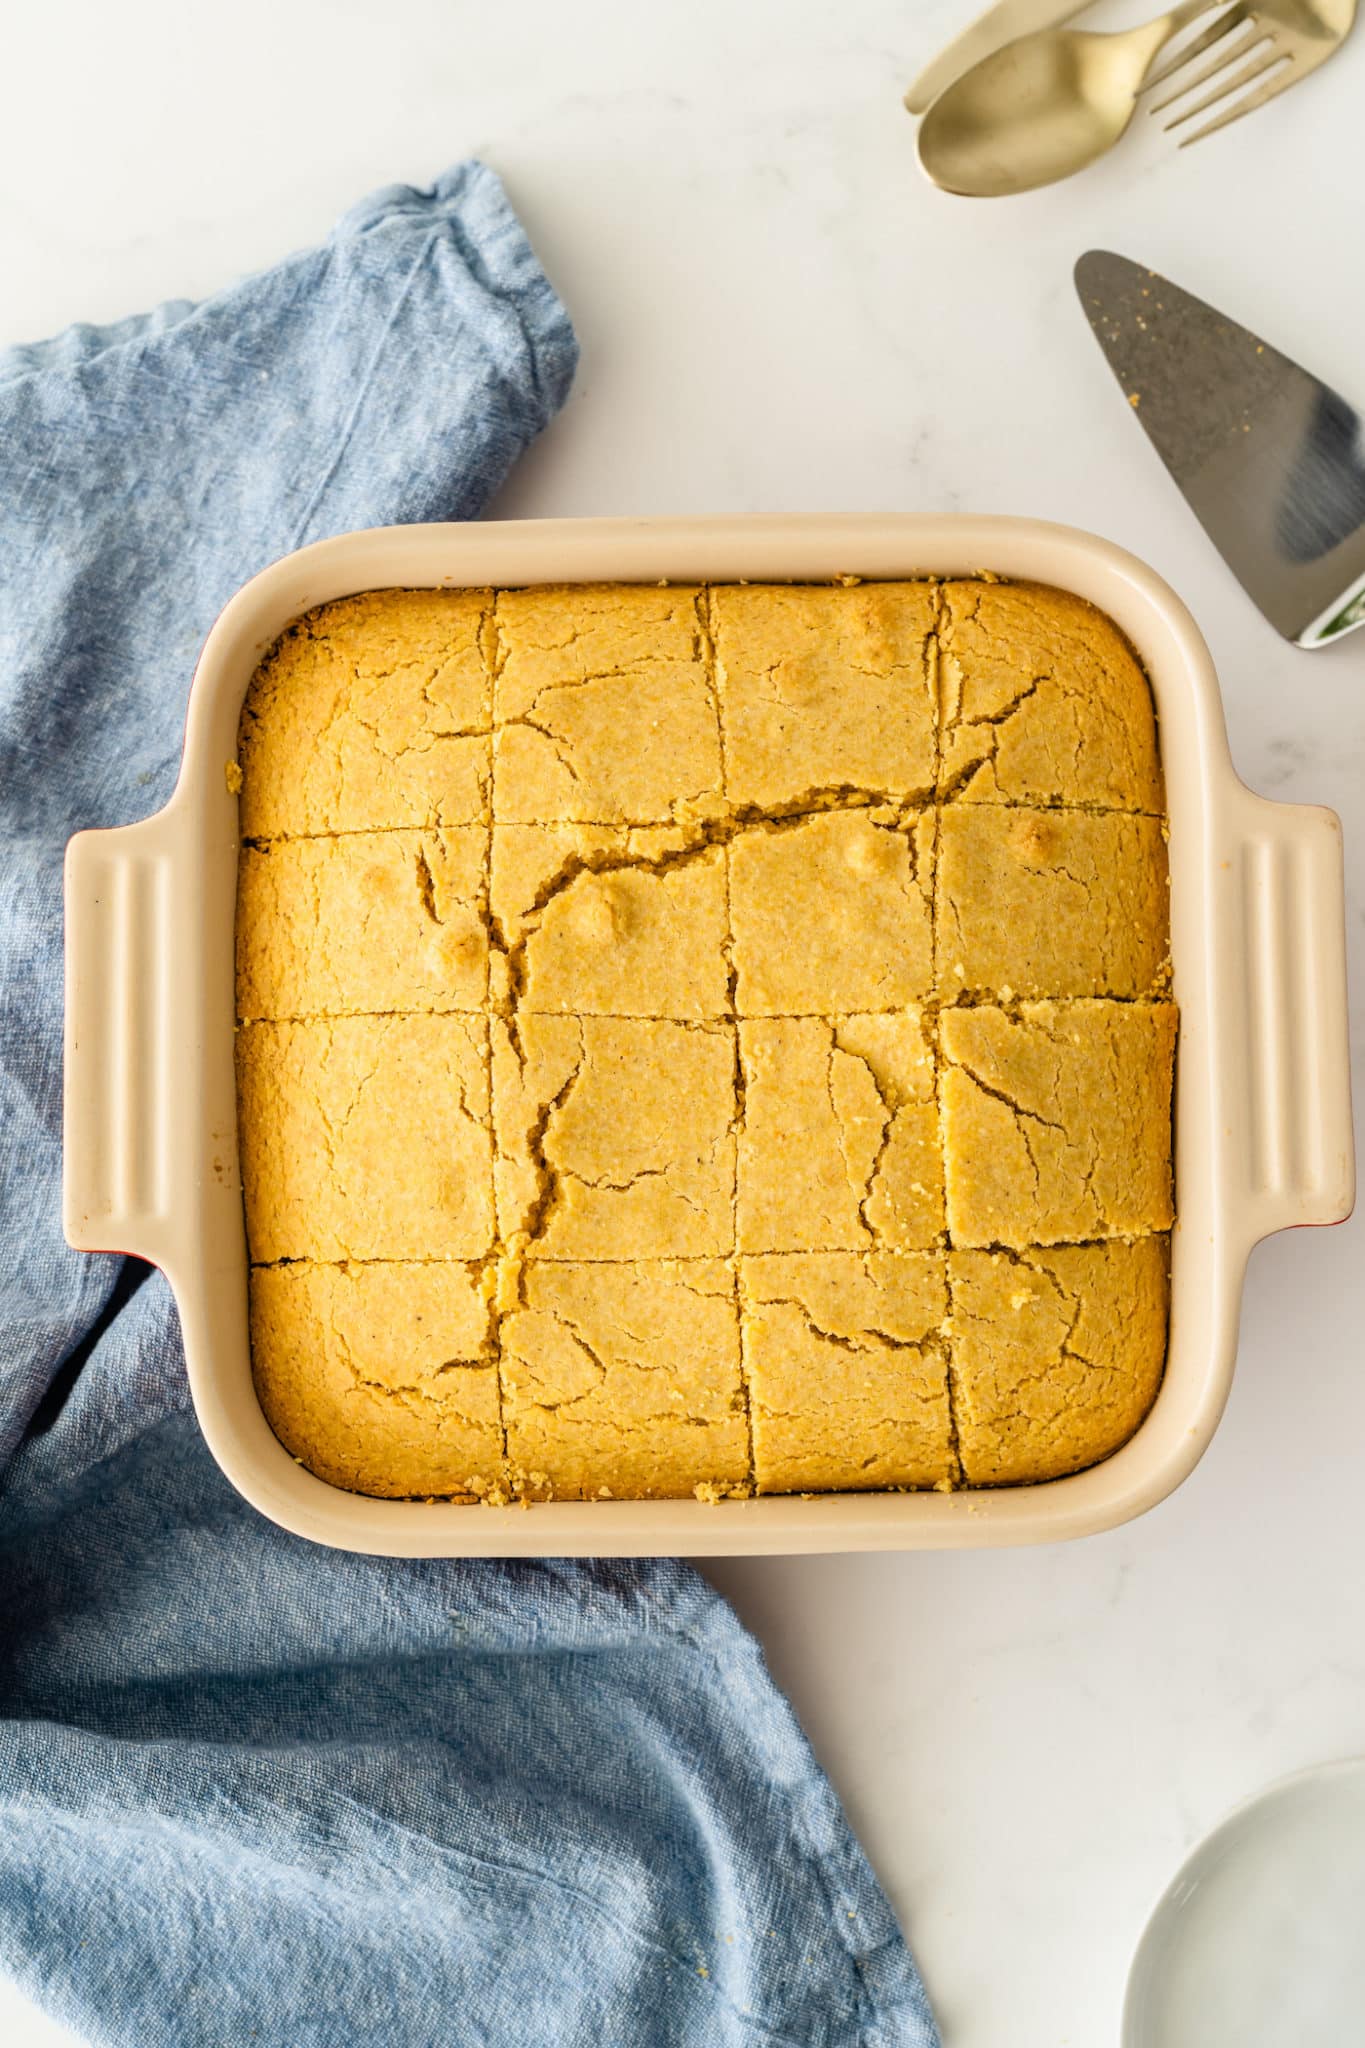 cornbread cooked in a square baking dish cooling on a countertop.